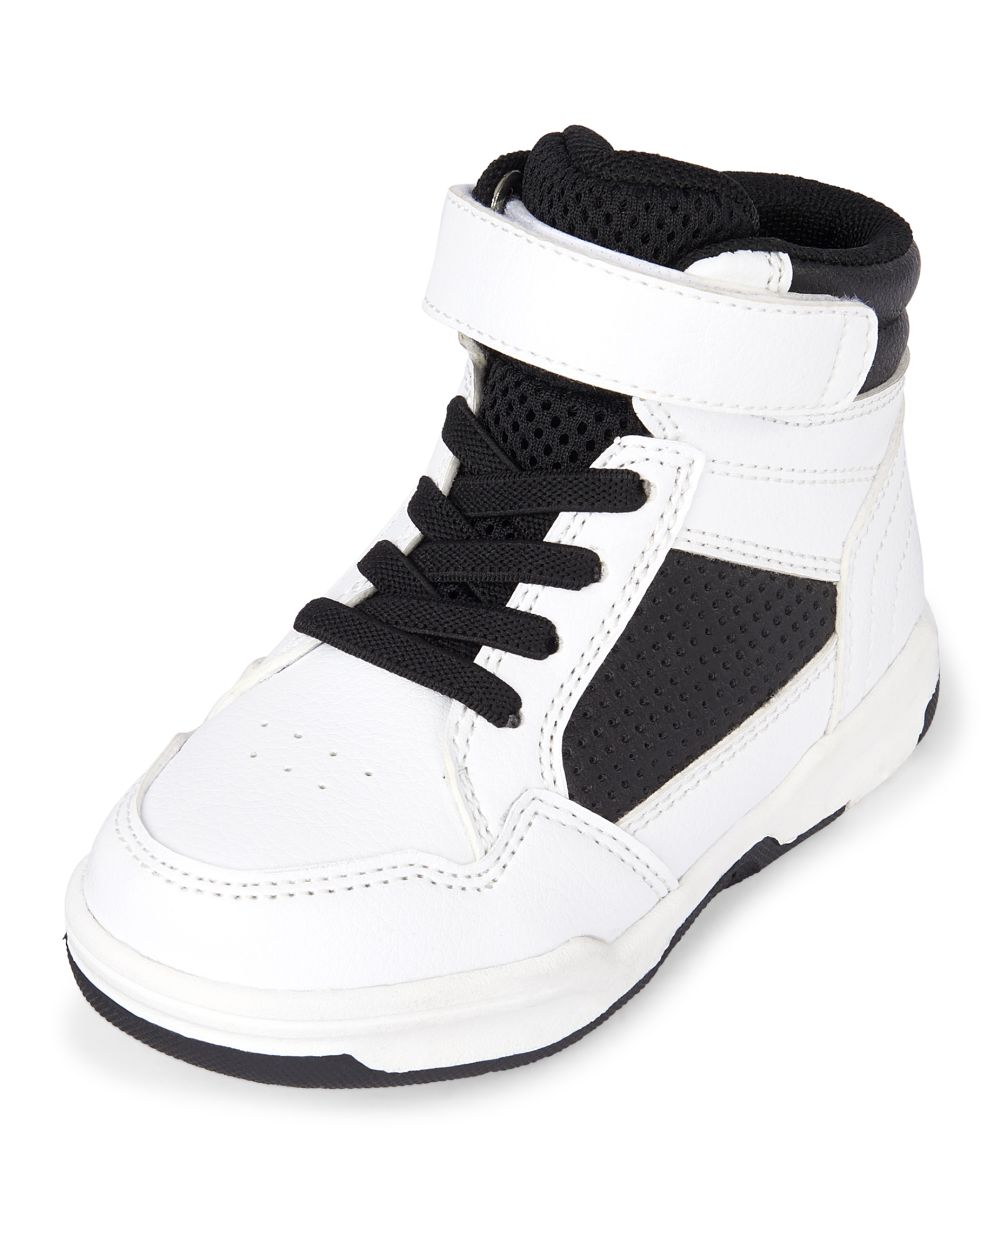 Toddler Boys Colorblock Faux Leather Hi Top Sneakers